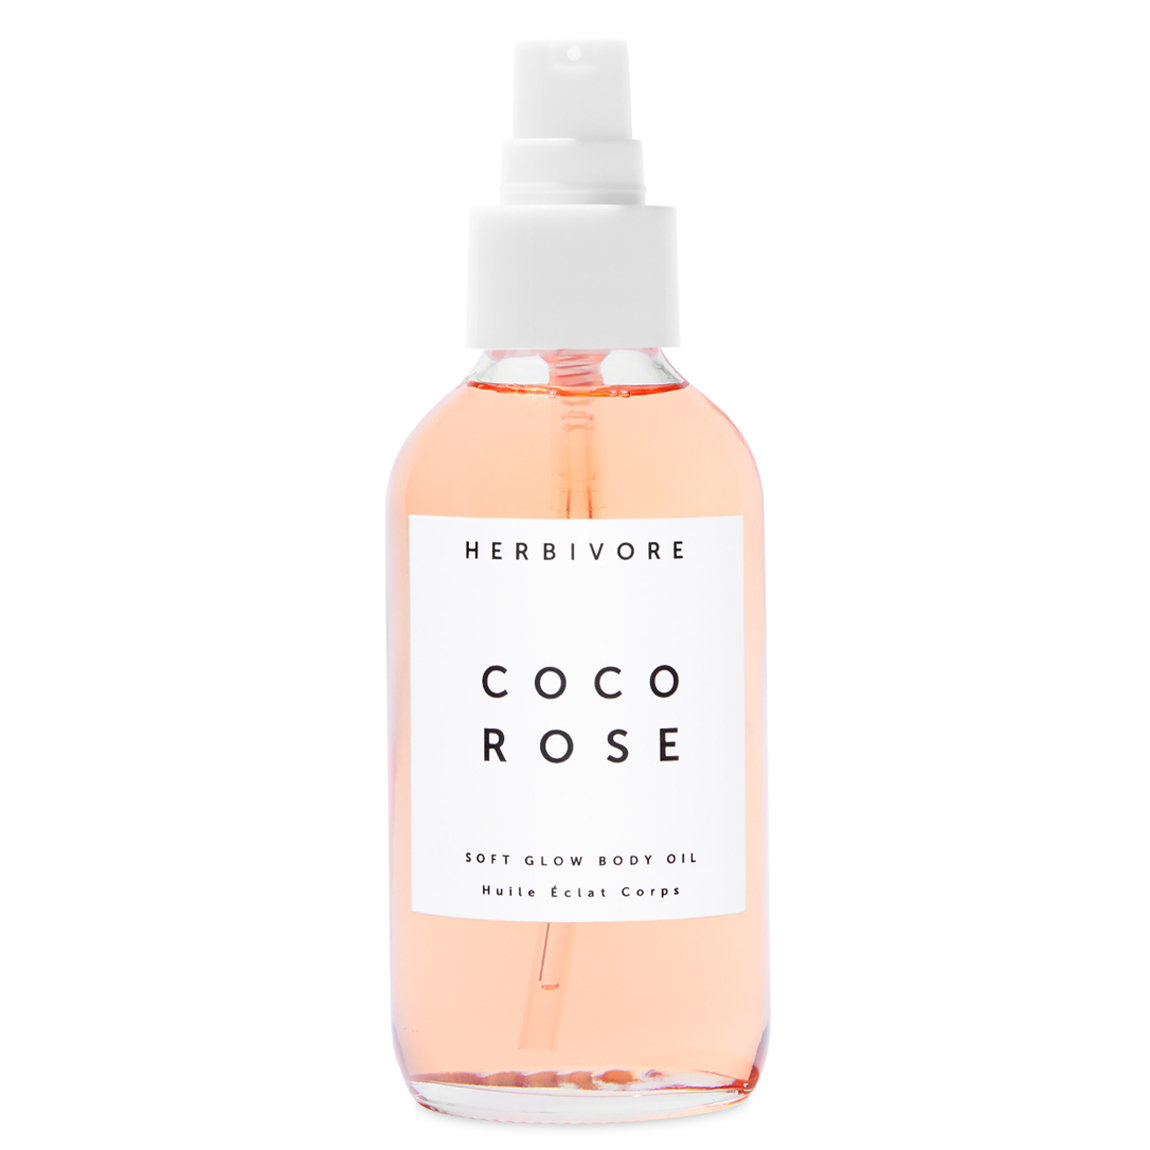 Herbivore Coco Rose Soft Glow Body Oil alternative view 1 - product swatch.